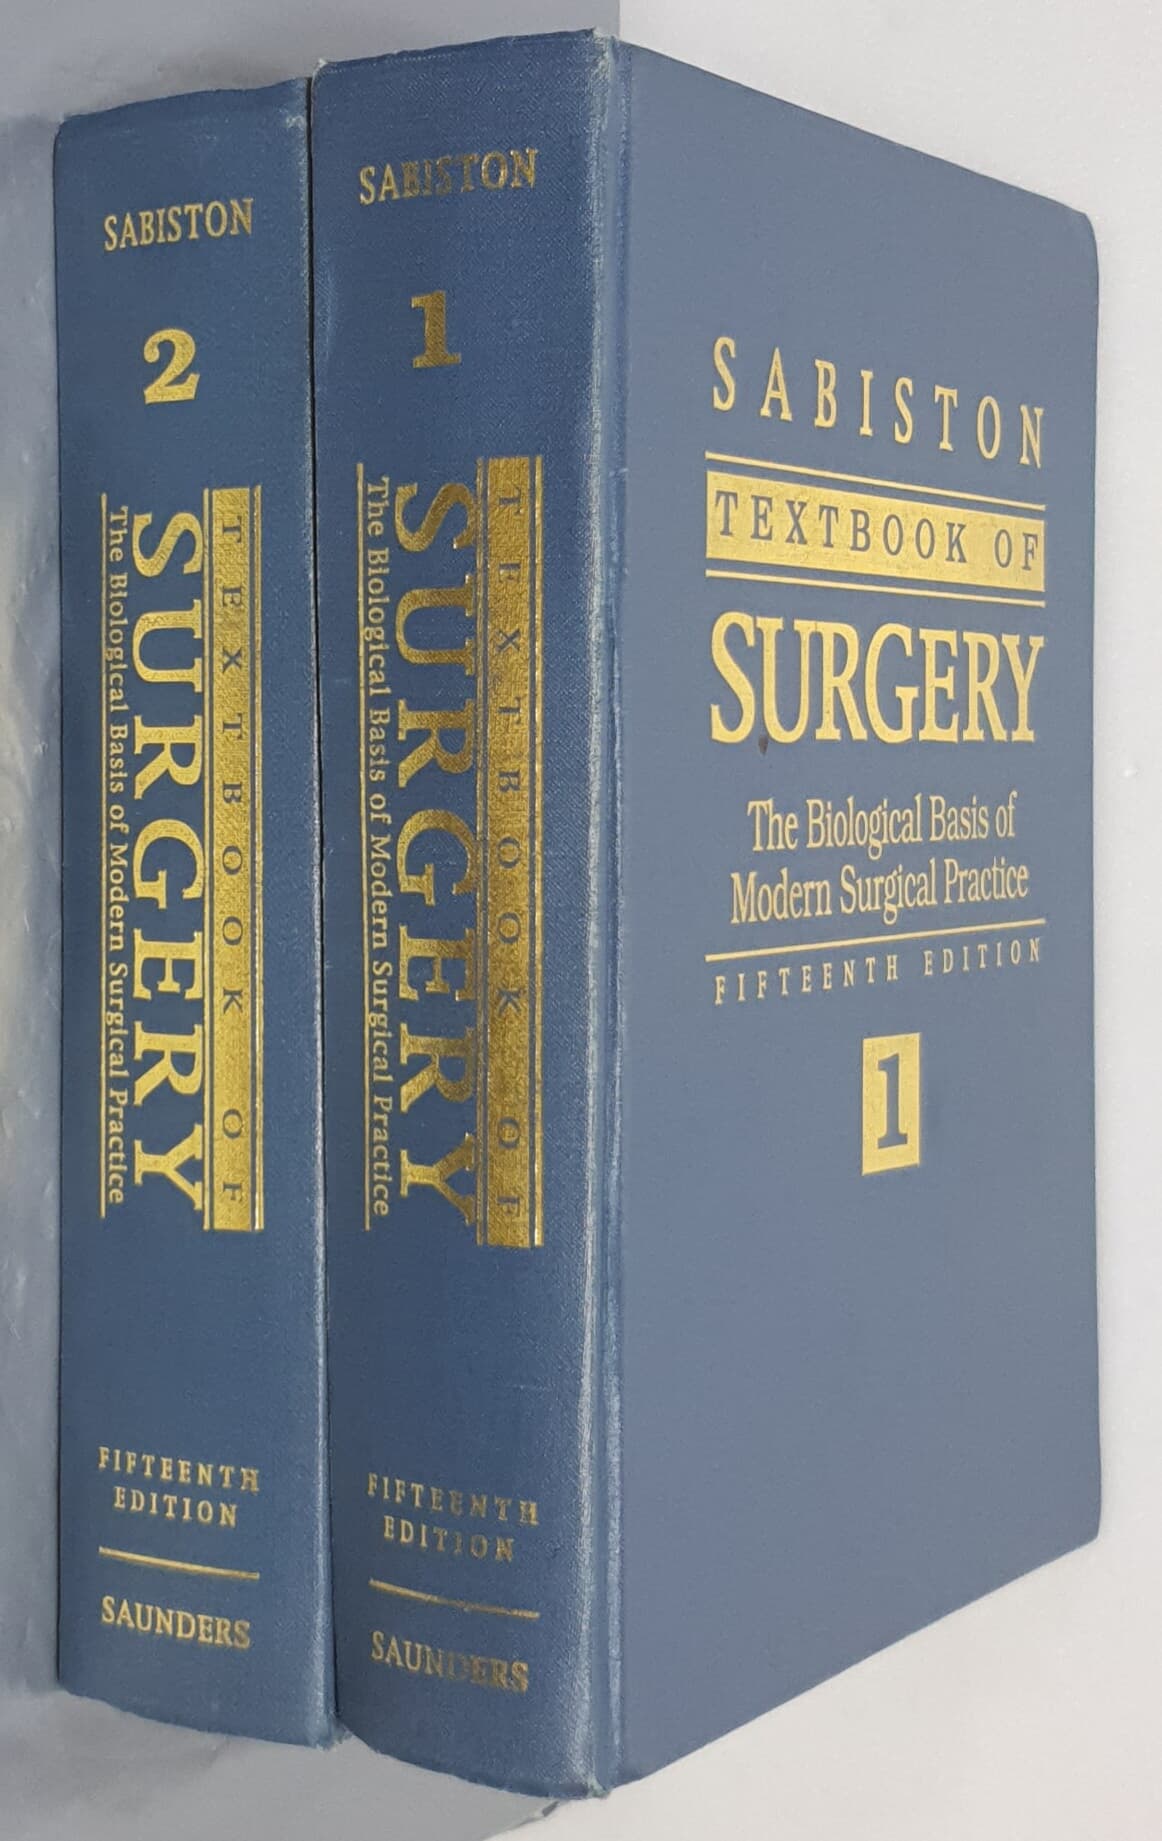 Sabiston Textbook of Surgery: The Biological Basis of Modern Surgical Practice 15 Edition (전2권)